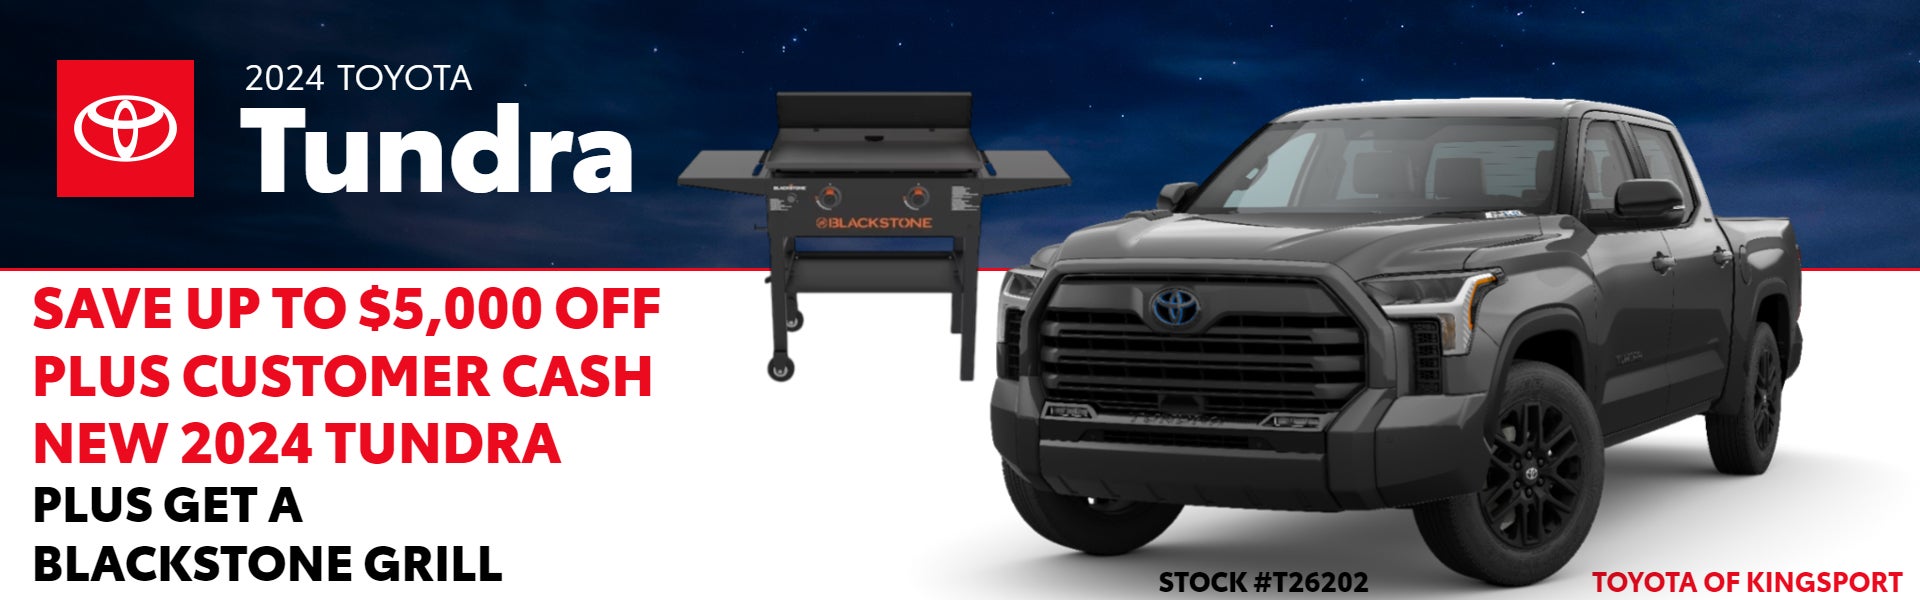 24 Toyota Tundra Special. Pictured black Tundra & grill 